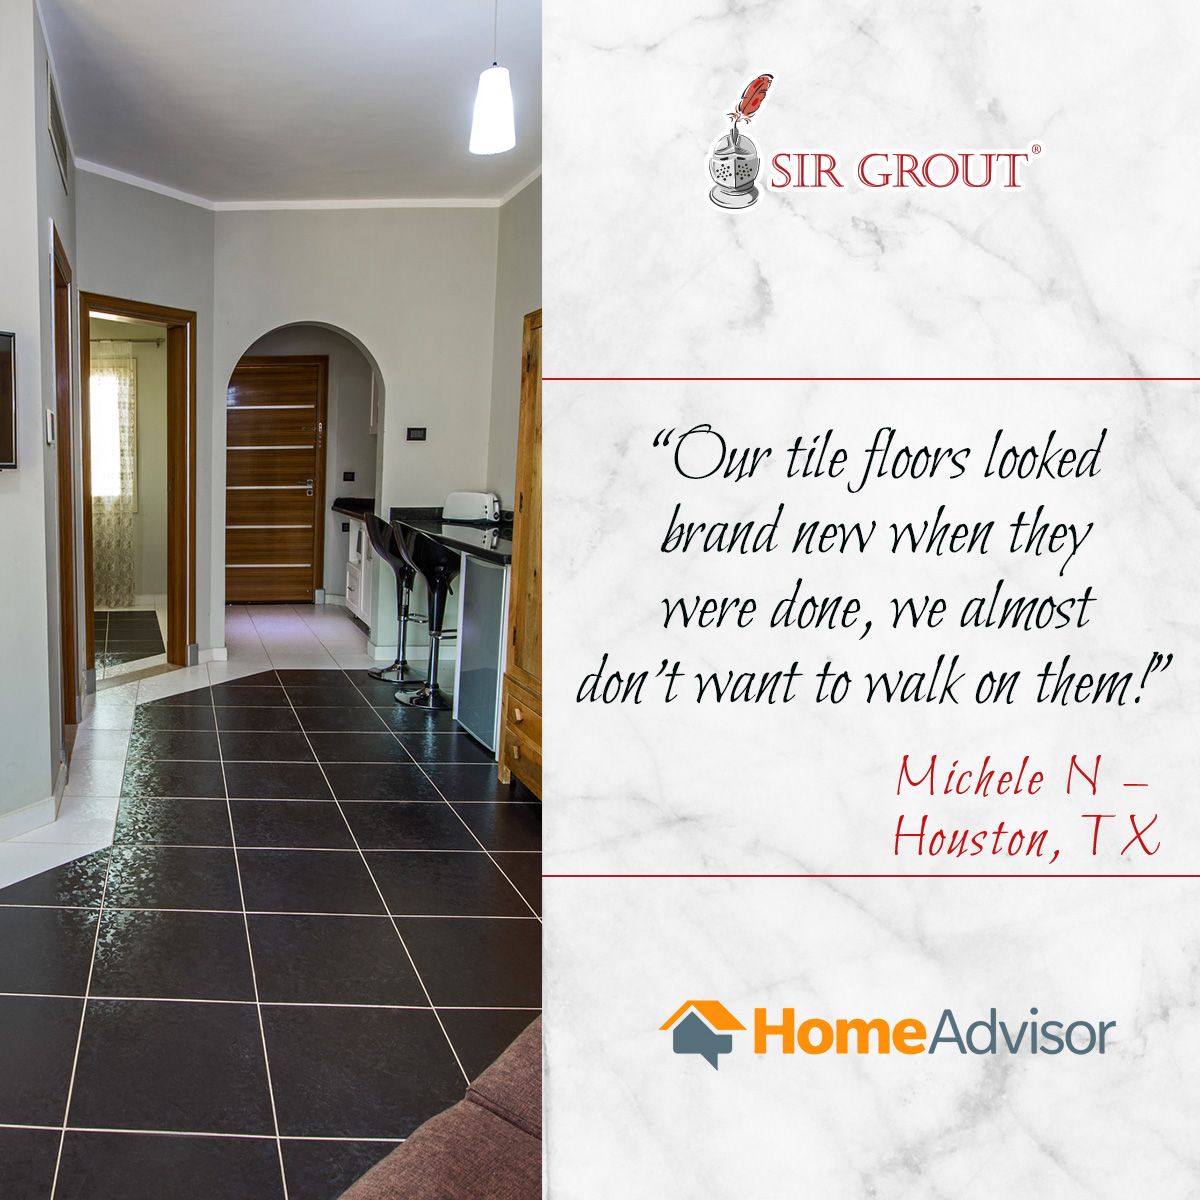 Our tile floors looked brand new when they were done, we almost don't want to walk on them!